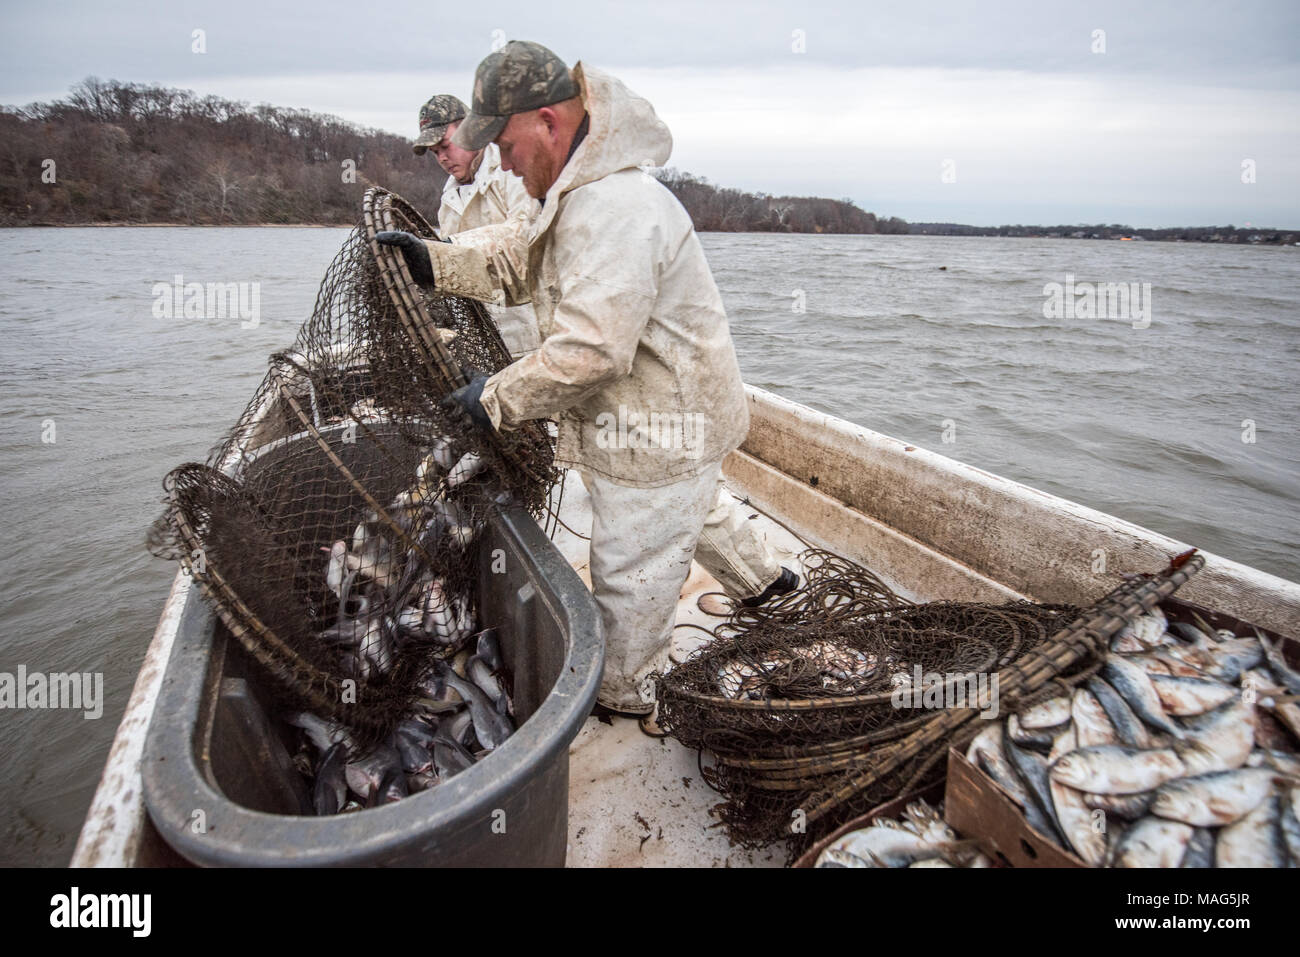 Fisherman unloading a hoop net of blue catfish into a barrel on the Potomac River Stock Photo